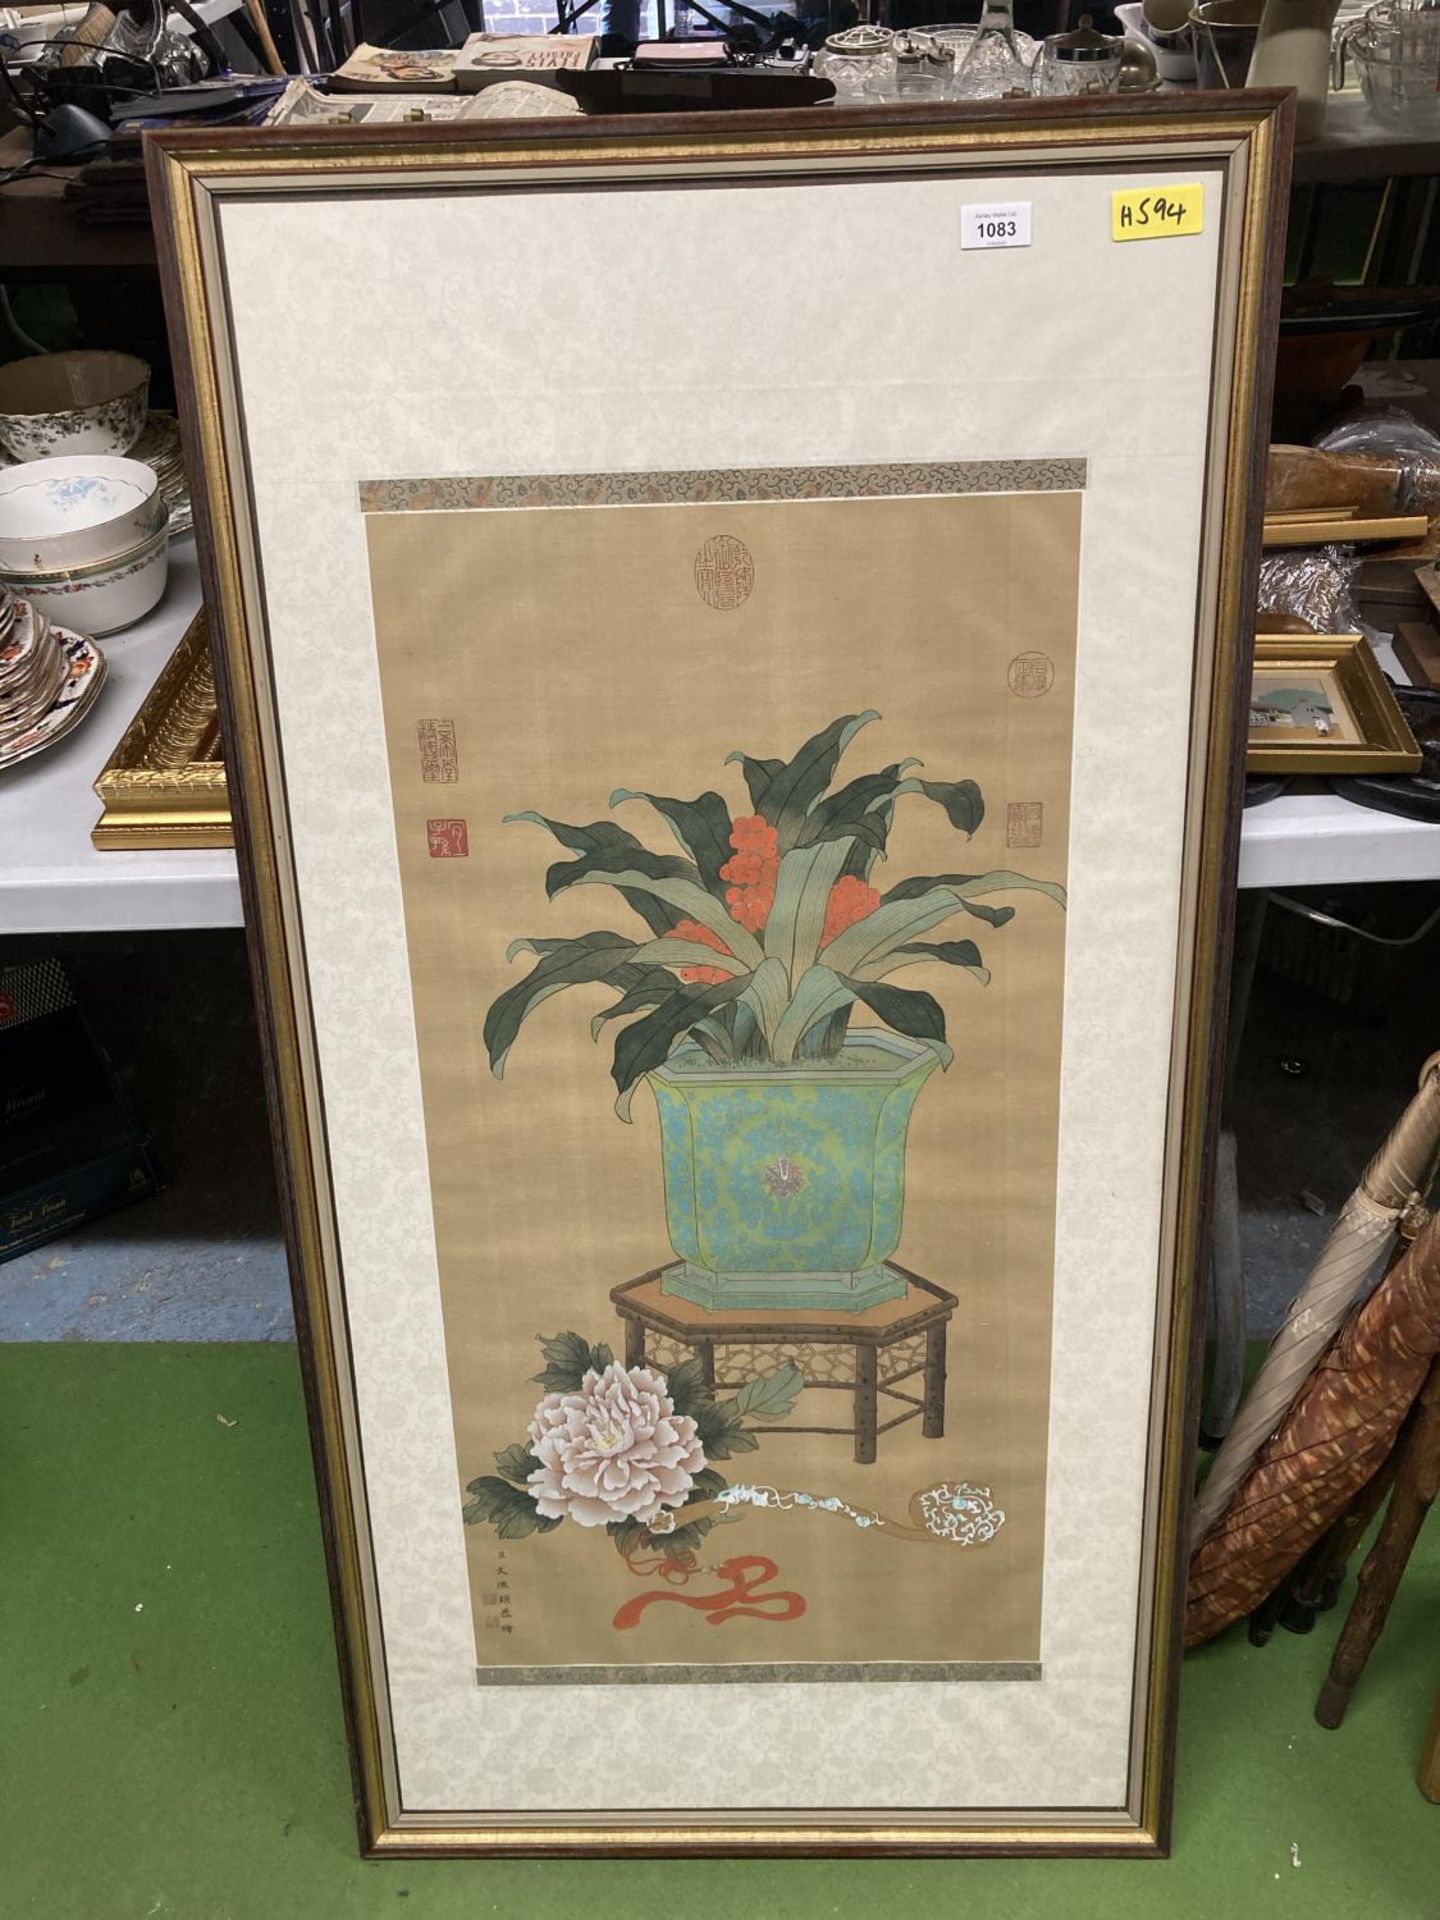 A LARGE FRAMED ORIENTAL PRINT OF A VASE WITH FLOWERS